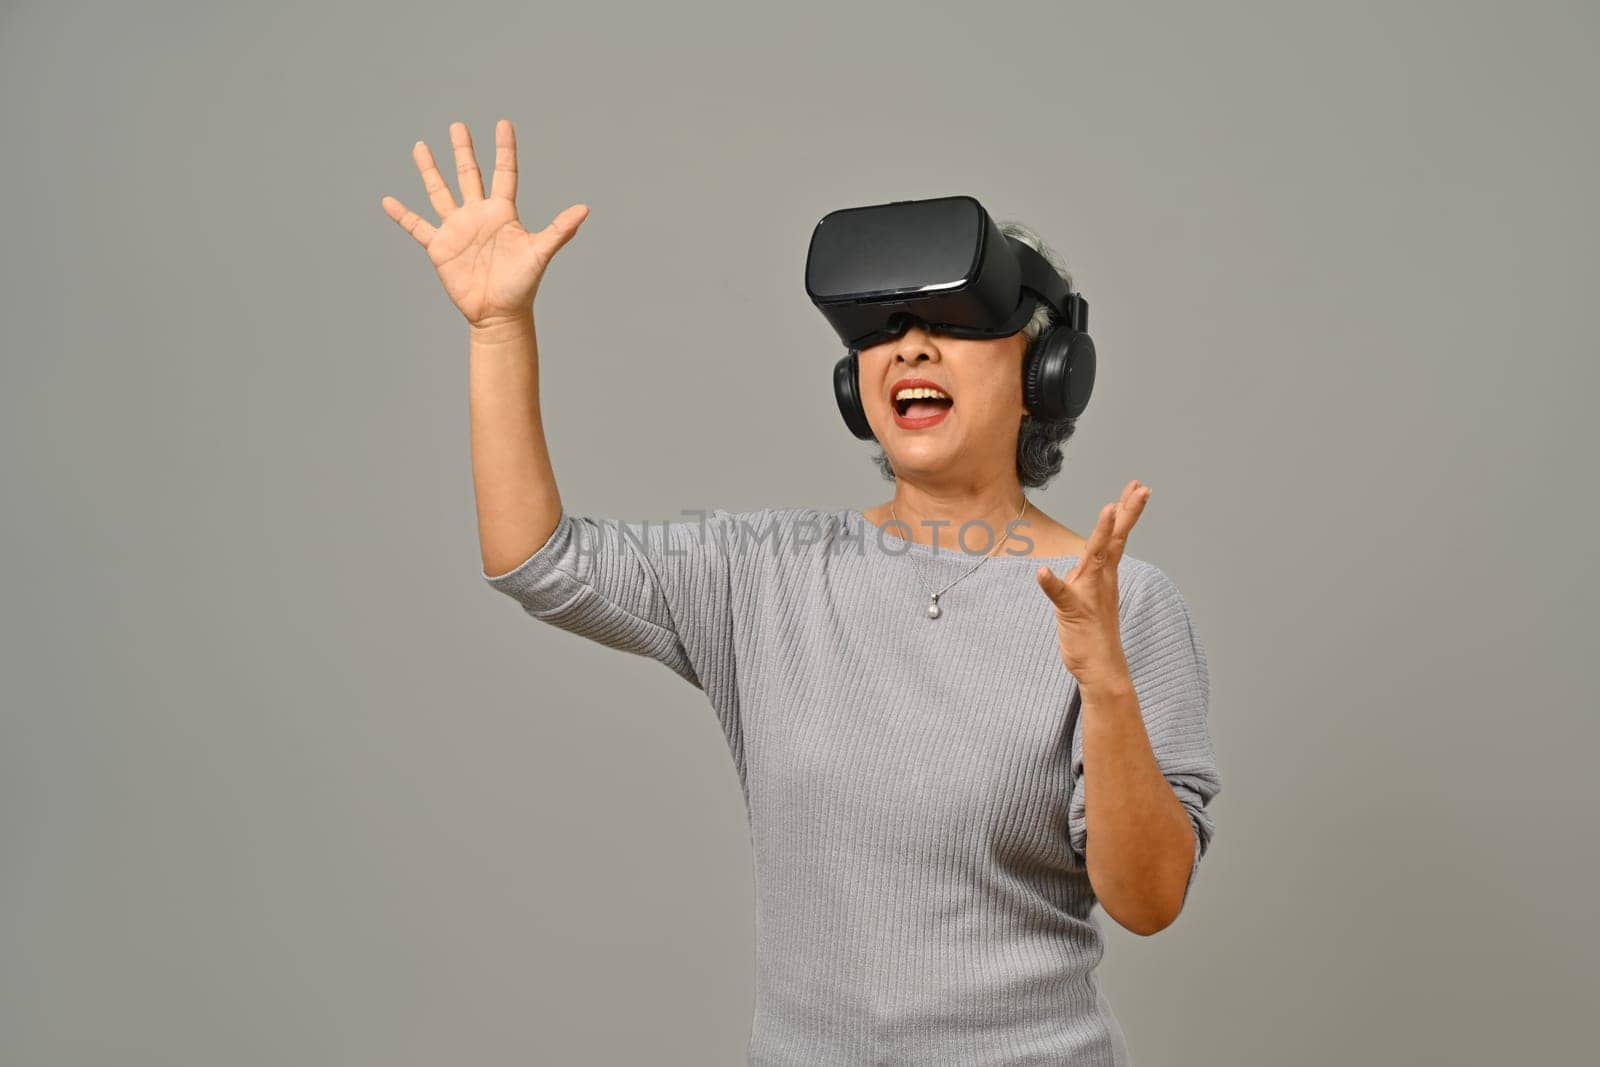 Portrait of amazed senior woman VR headset enjoying virtual reality experience. Modern technologies, innovations and gadgets.